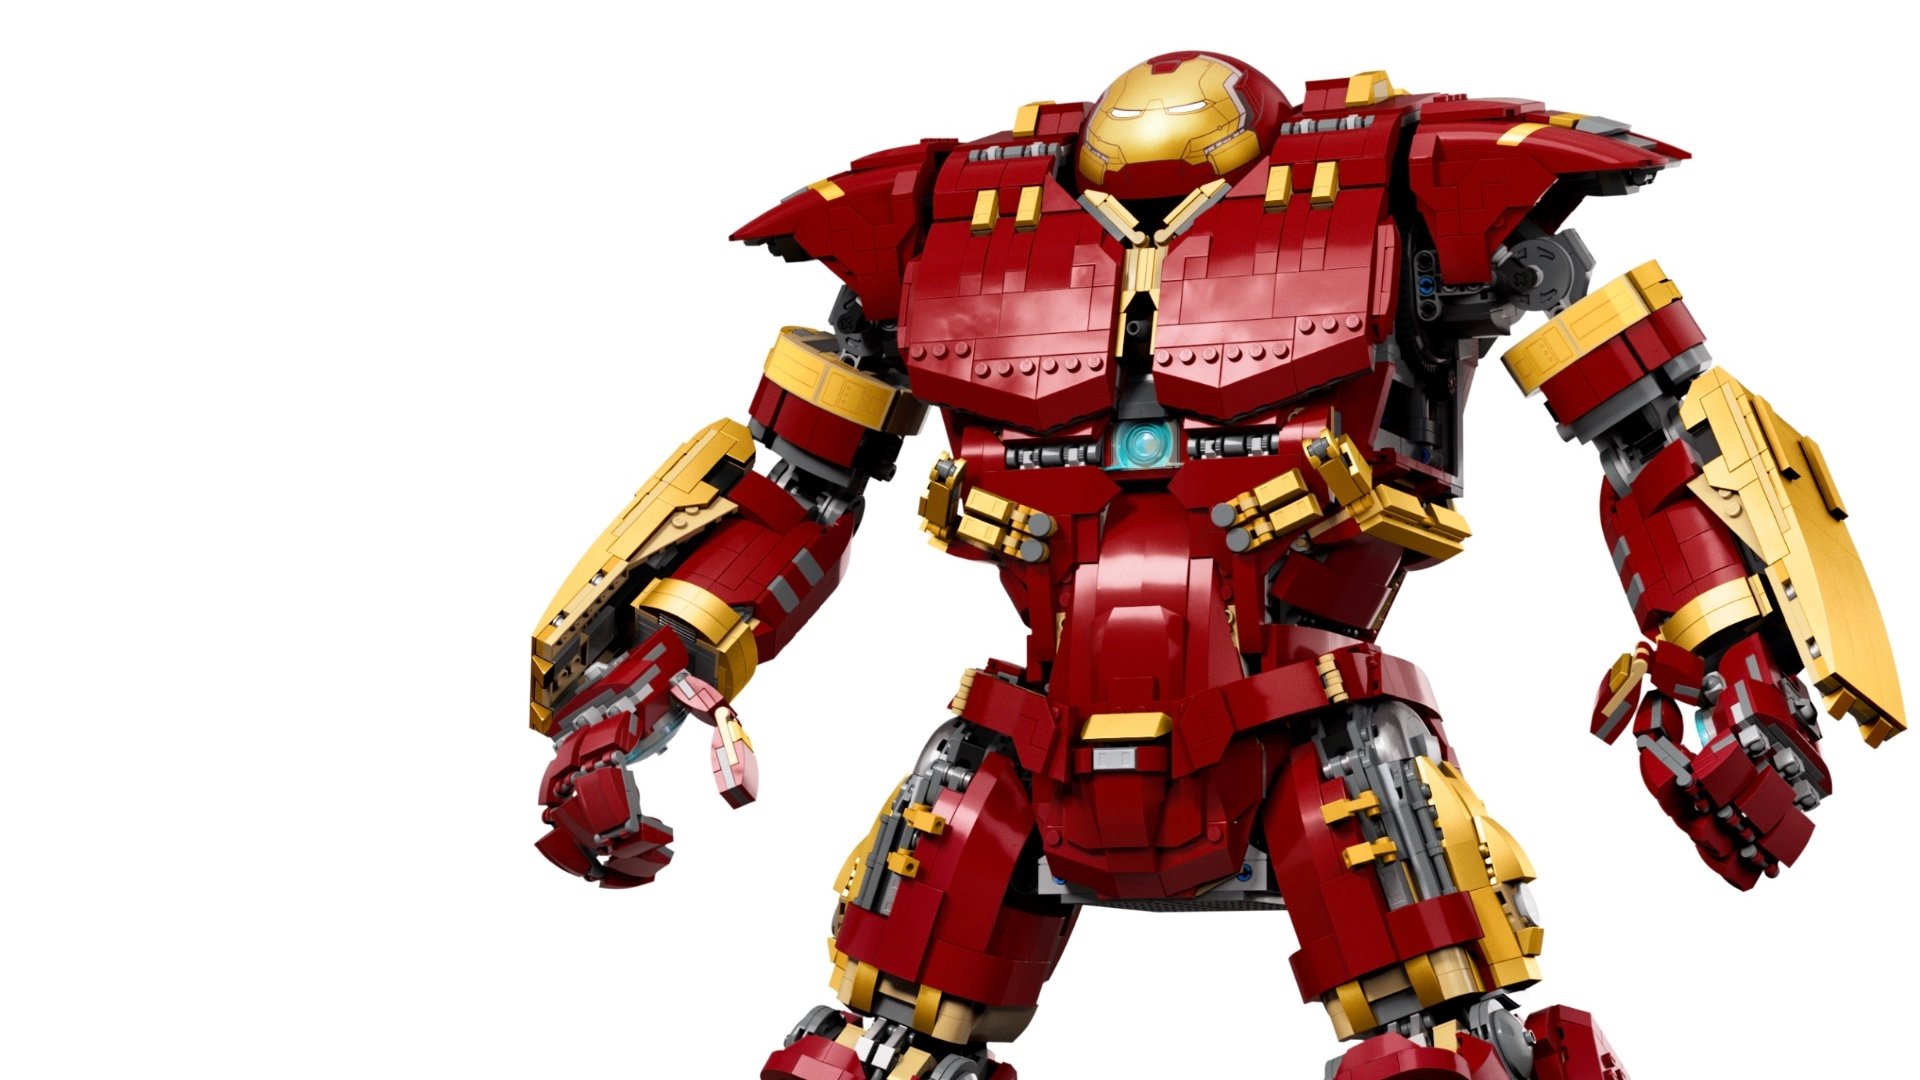 LEGO Reveals Epic 049 Piece Iron Man Hulkbuster, Which is Their Biggest Marvel Set